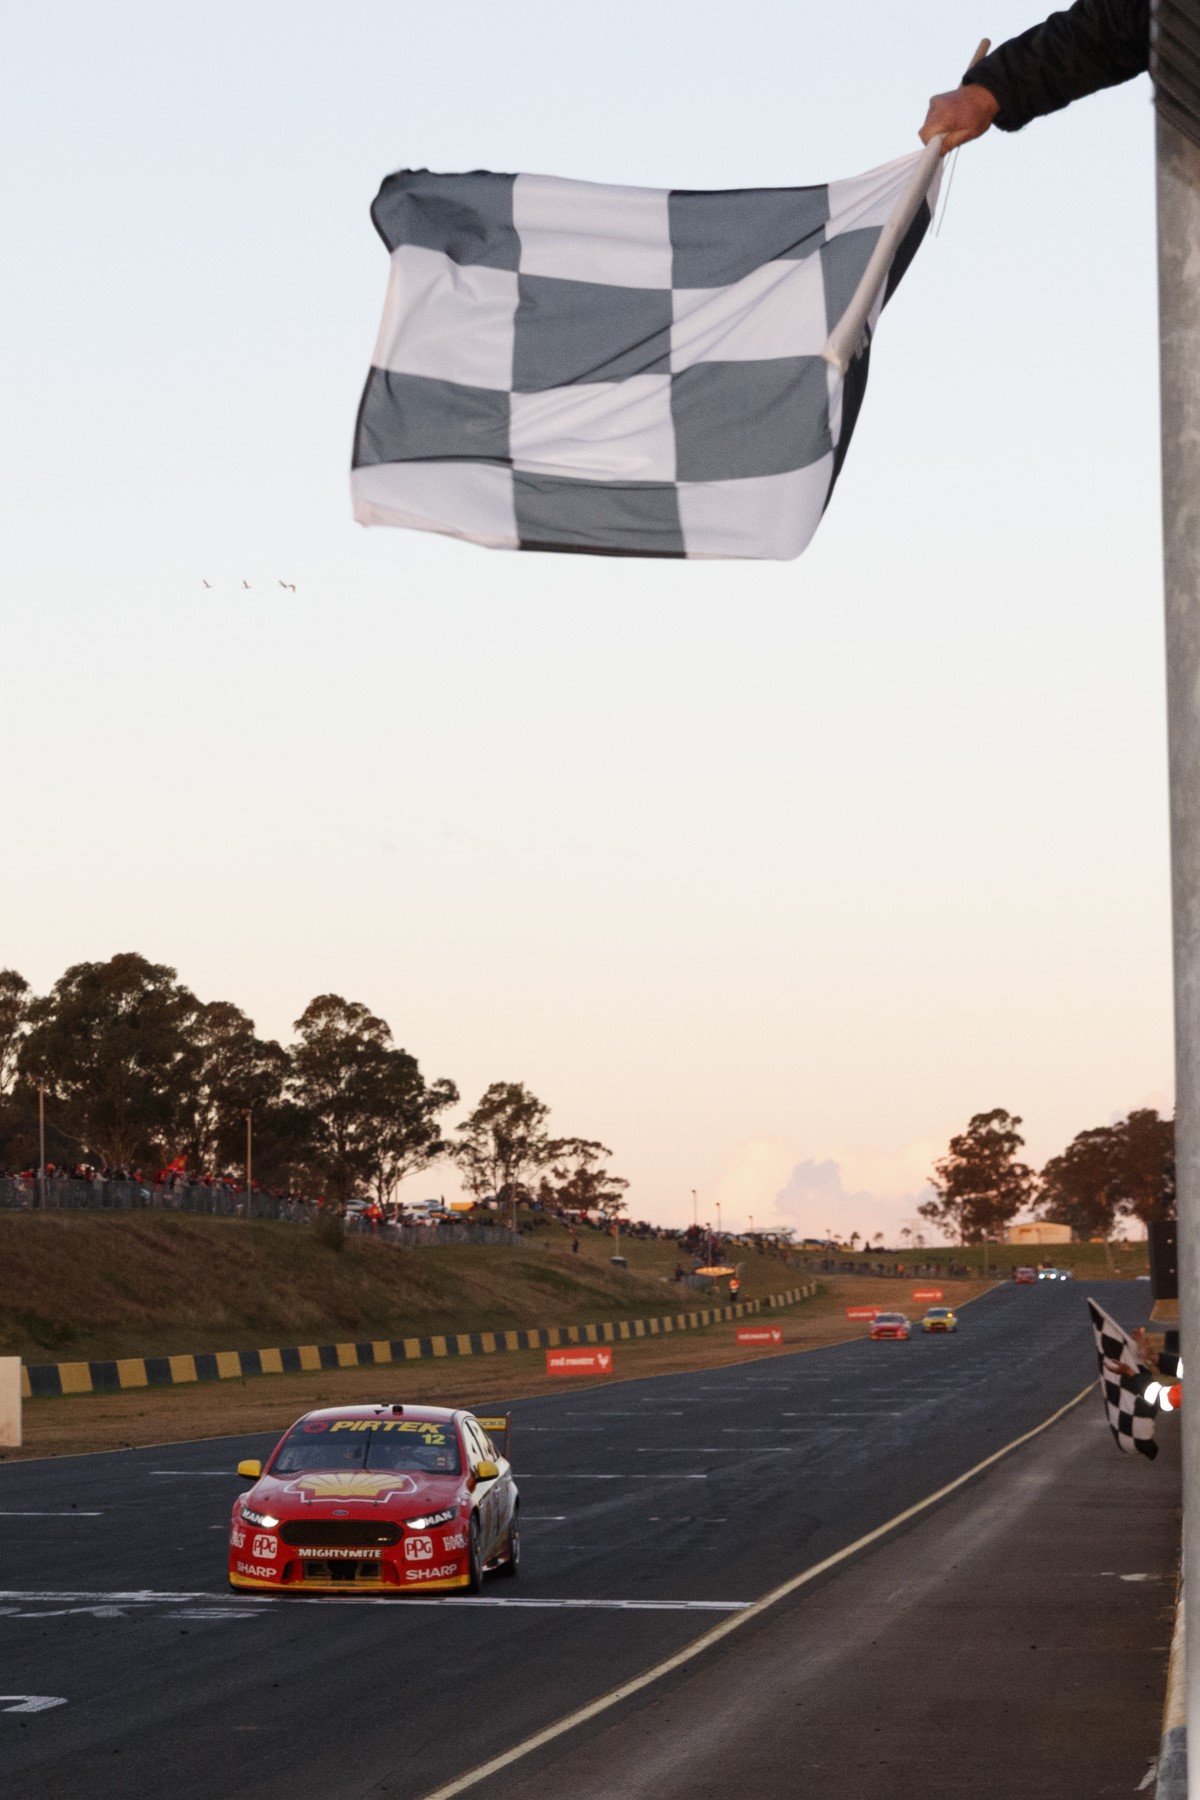 Coulthard takes the flag